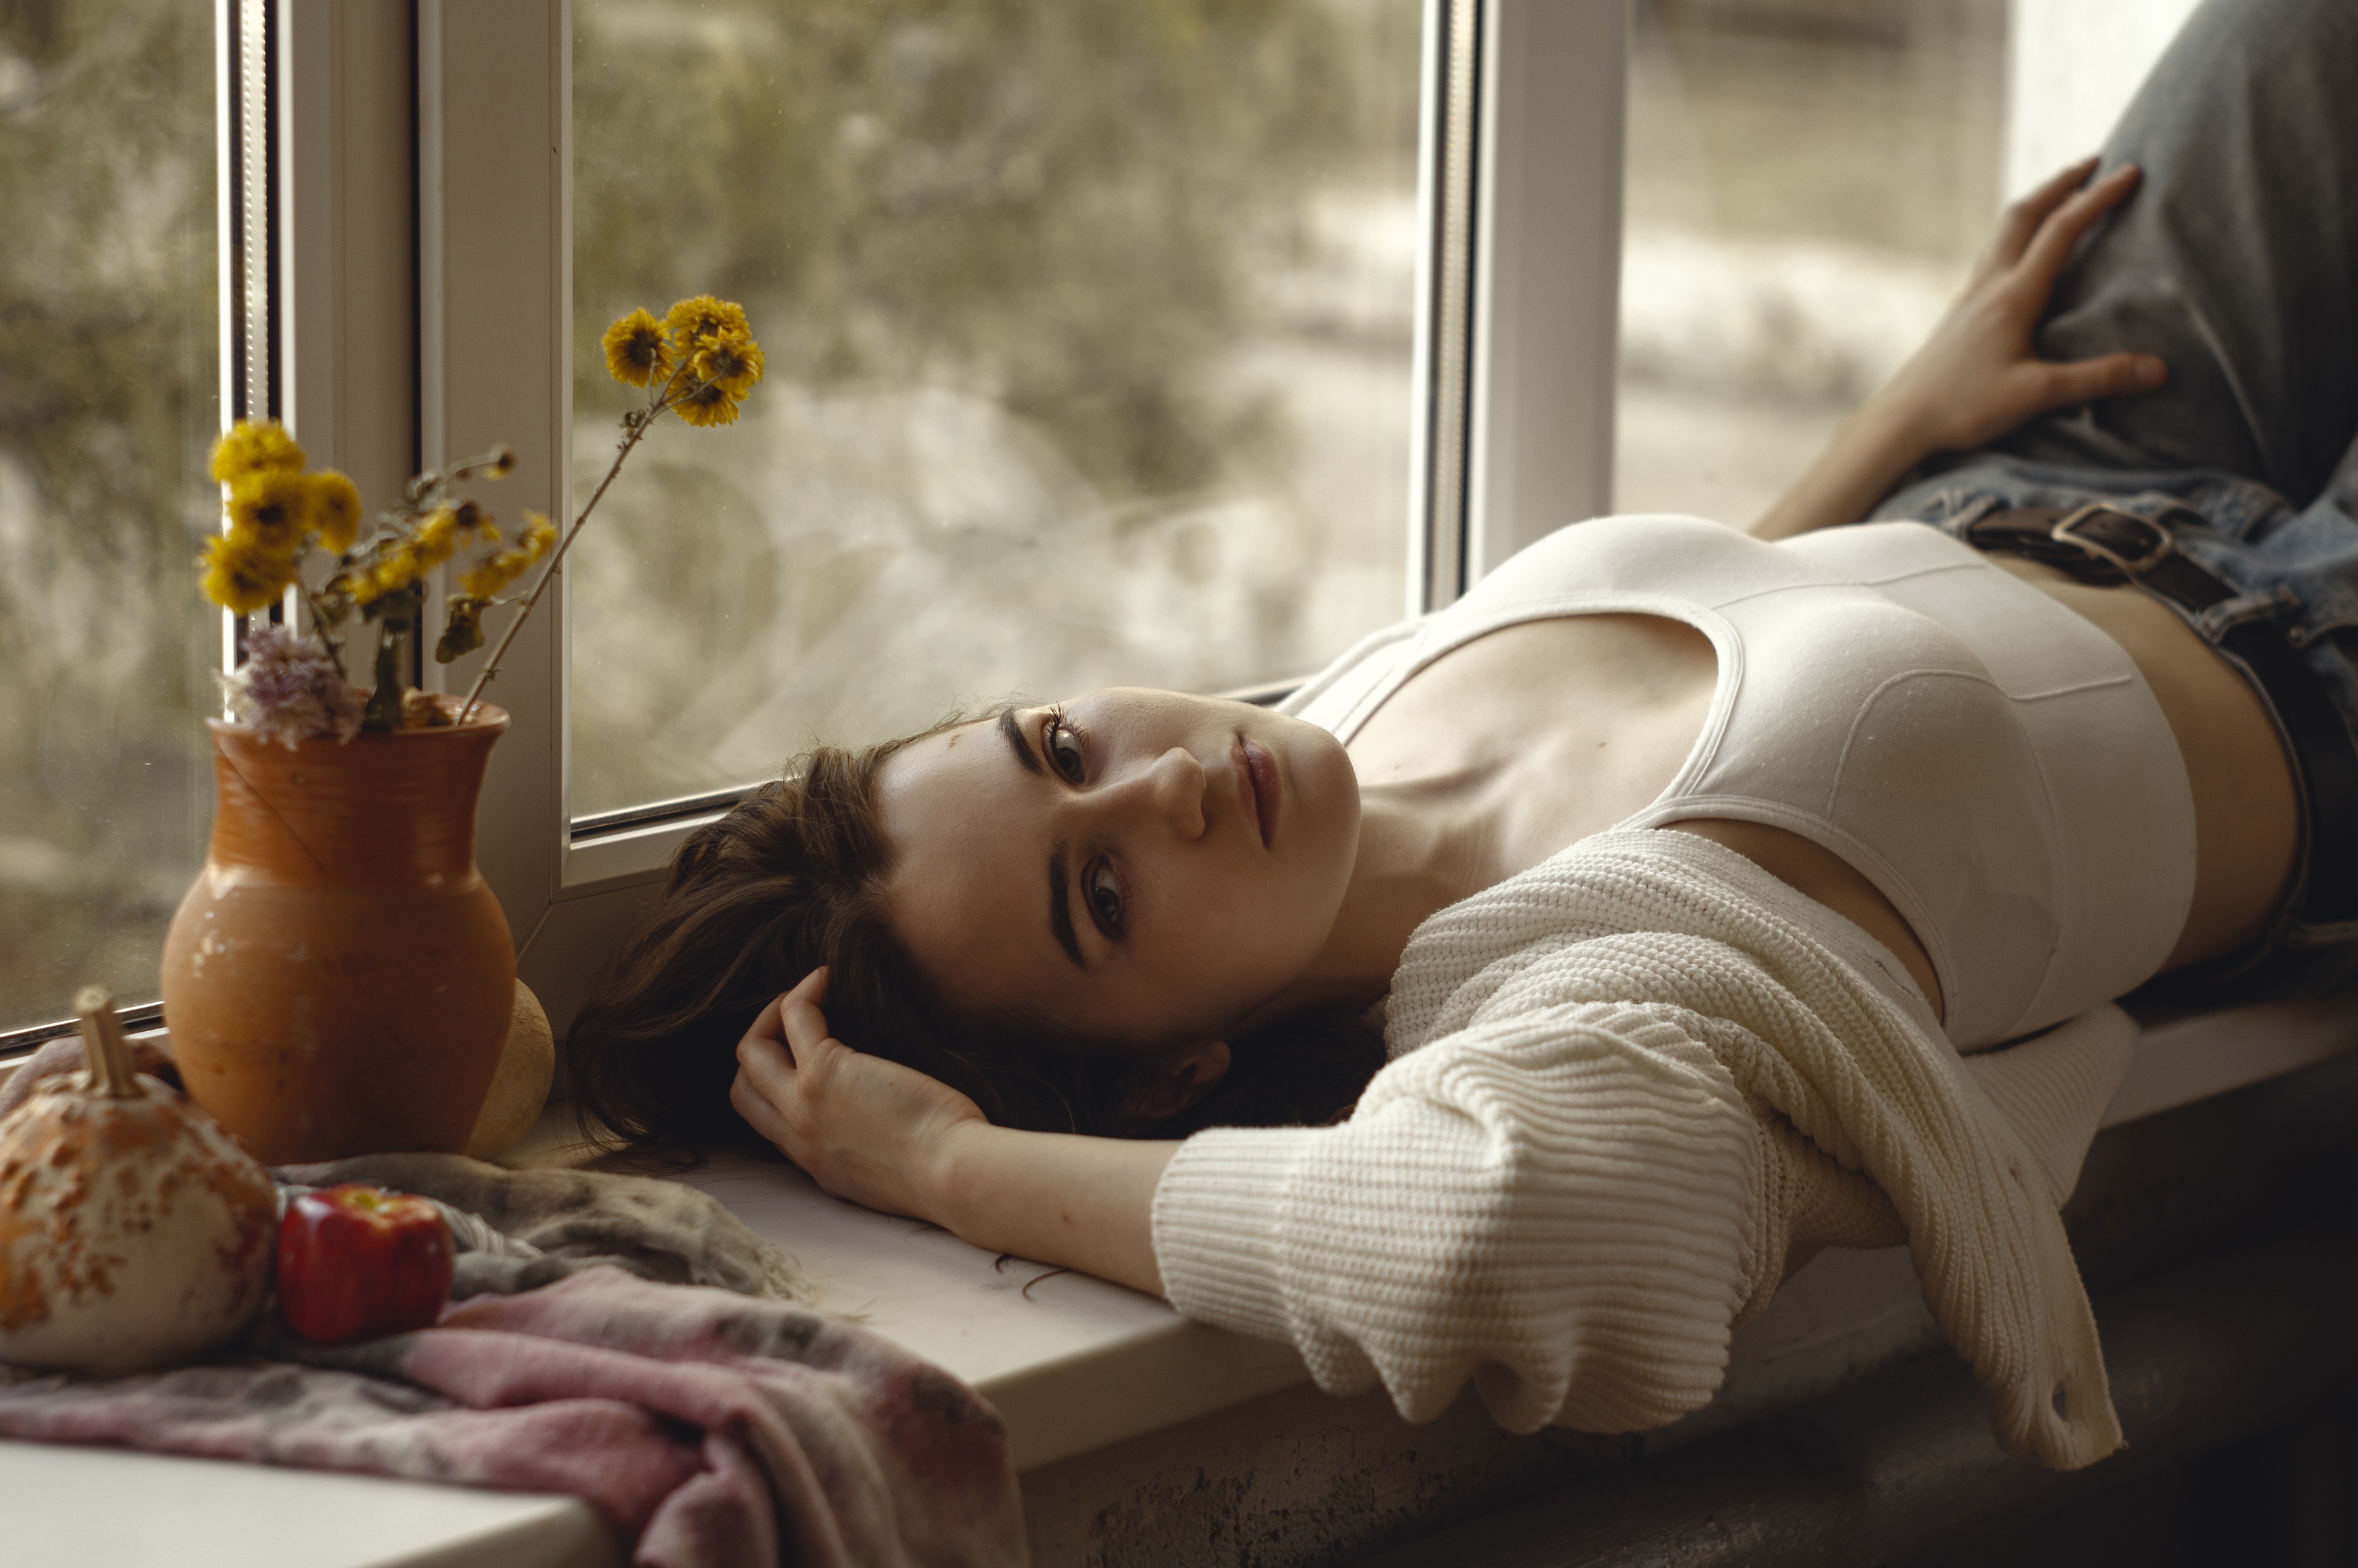 Model Red Lipstick White Sweater White Tops Jeans Lying On Back By The Window Hands In Hair Looking  3500x2328